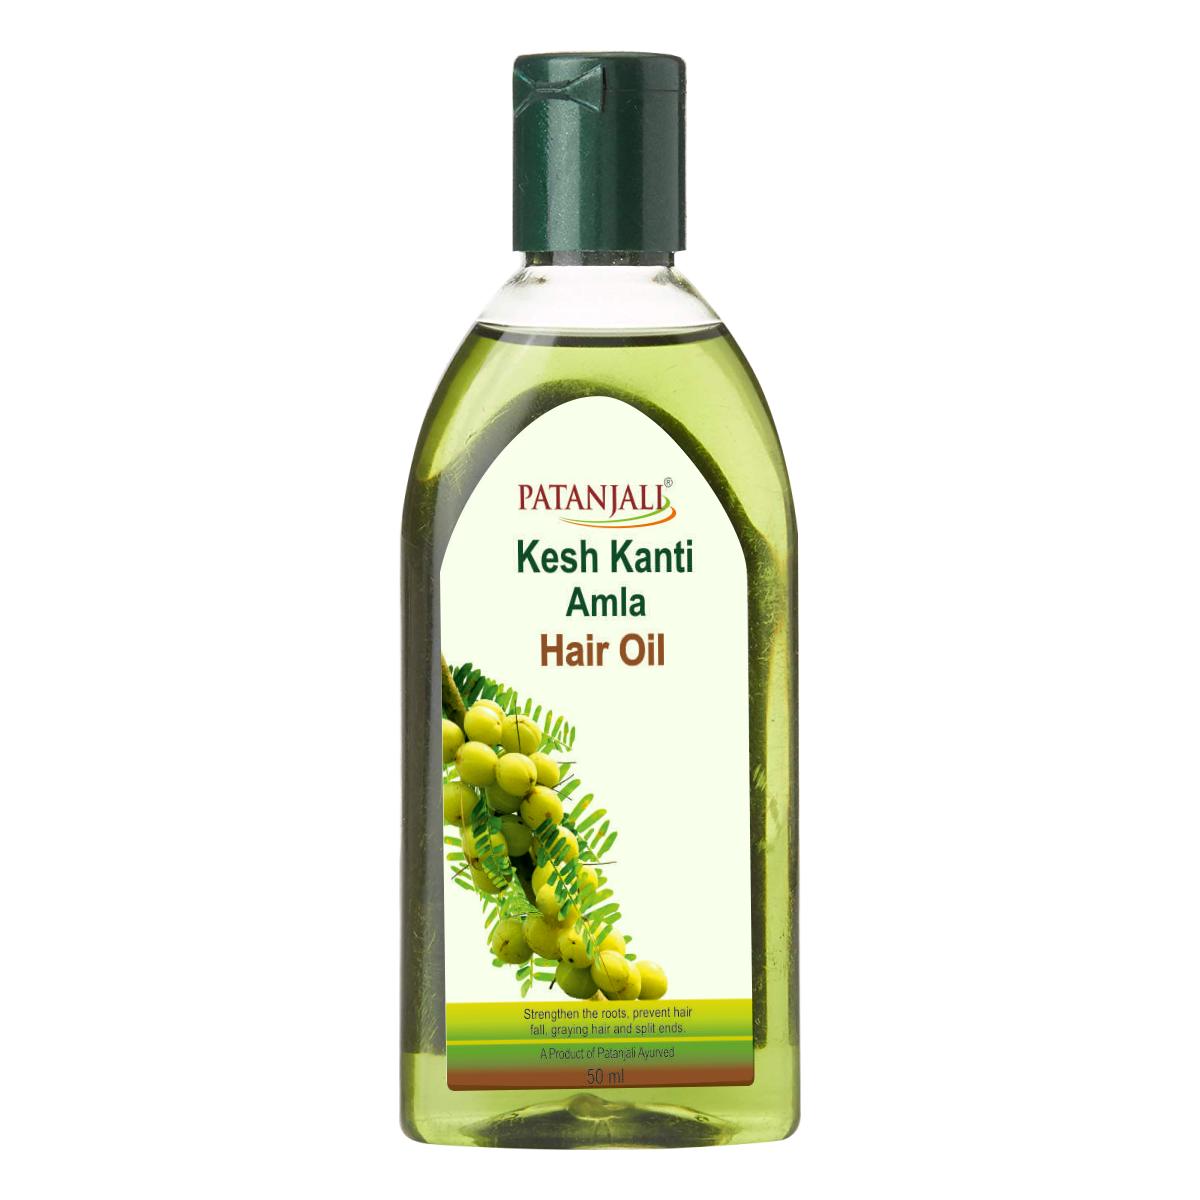 Patanjali Kesh Kanti Almond & Olive Oil Hair Conditioner Review